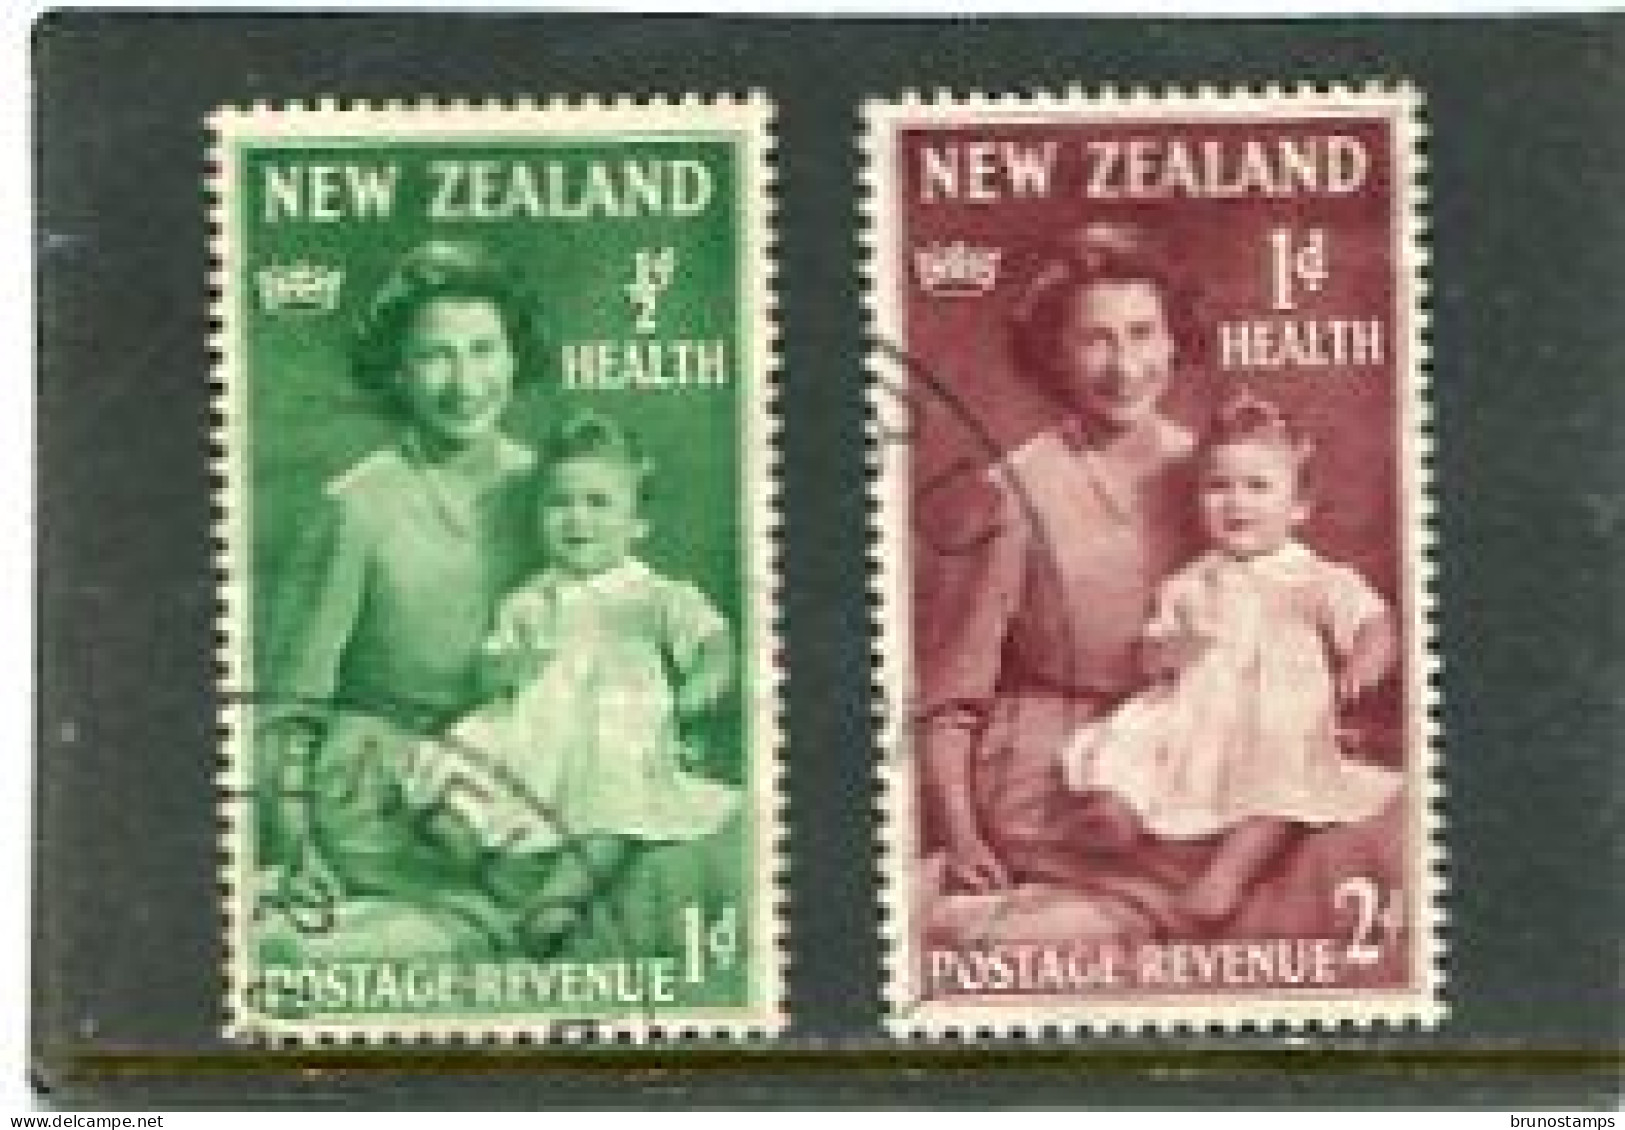 NEW ZEALAND - 1950  HEALTH  SET   FINE USED  SG 701/02 - Used Stamps